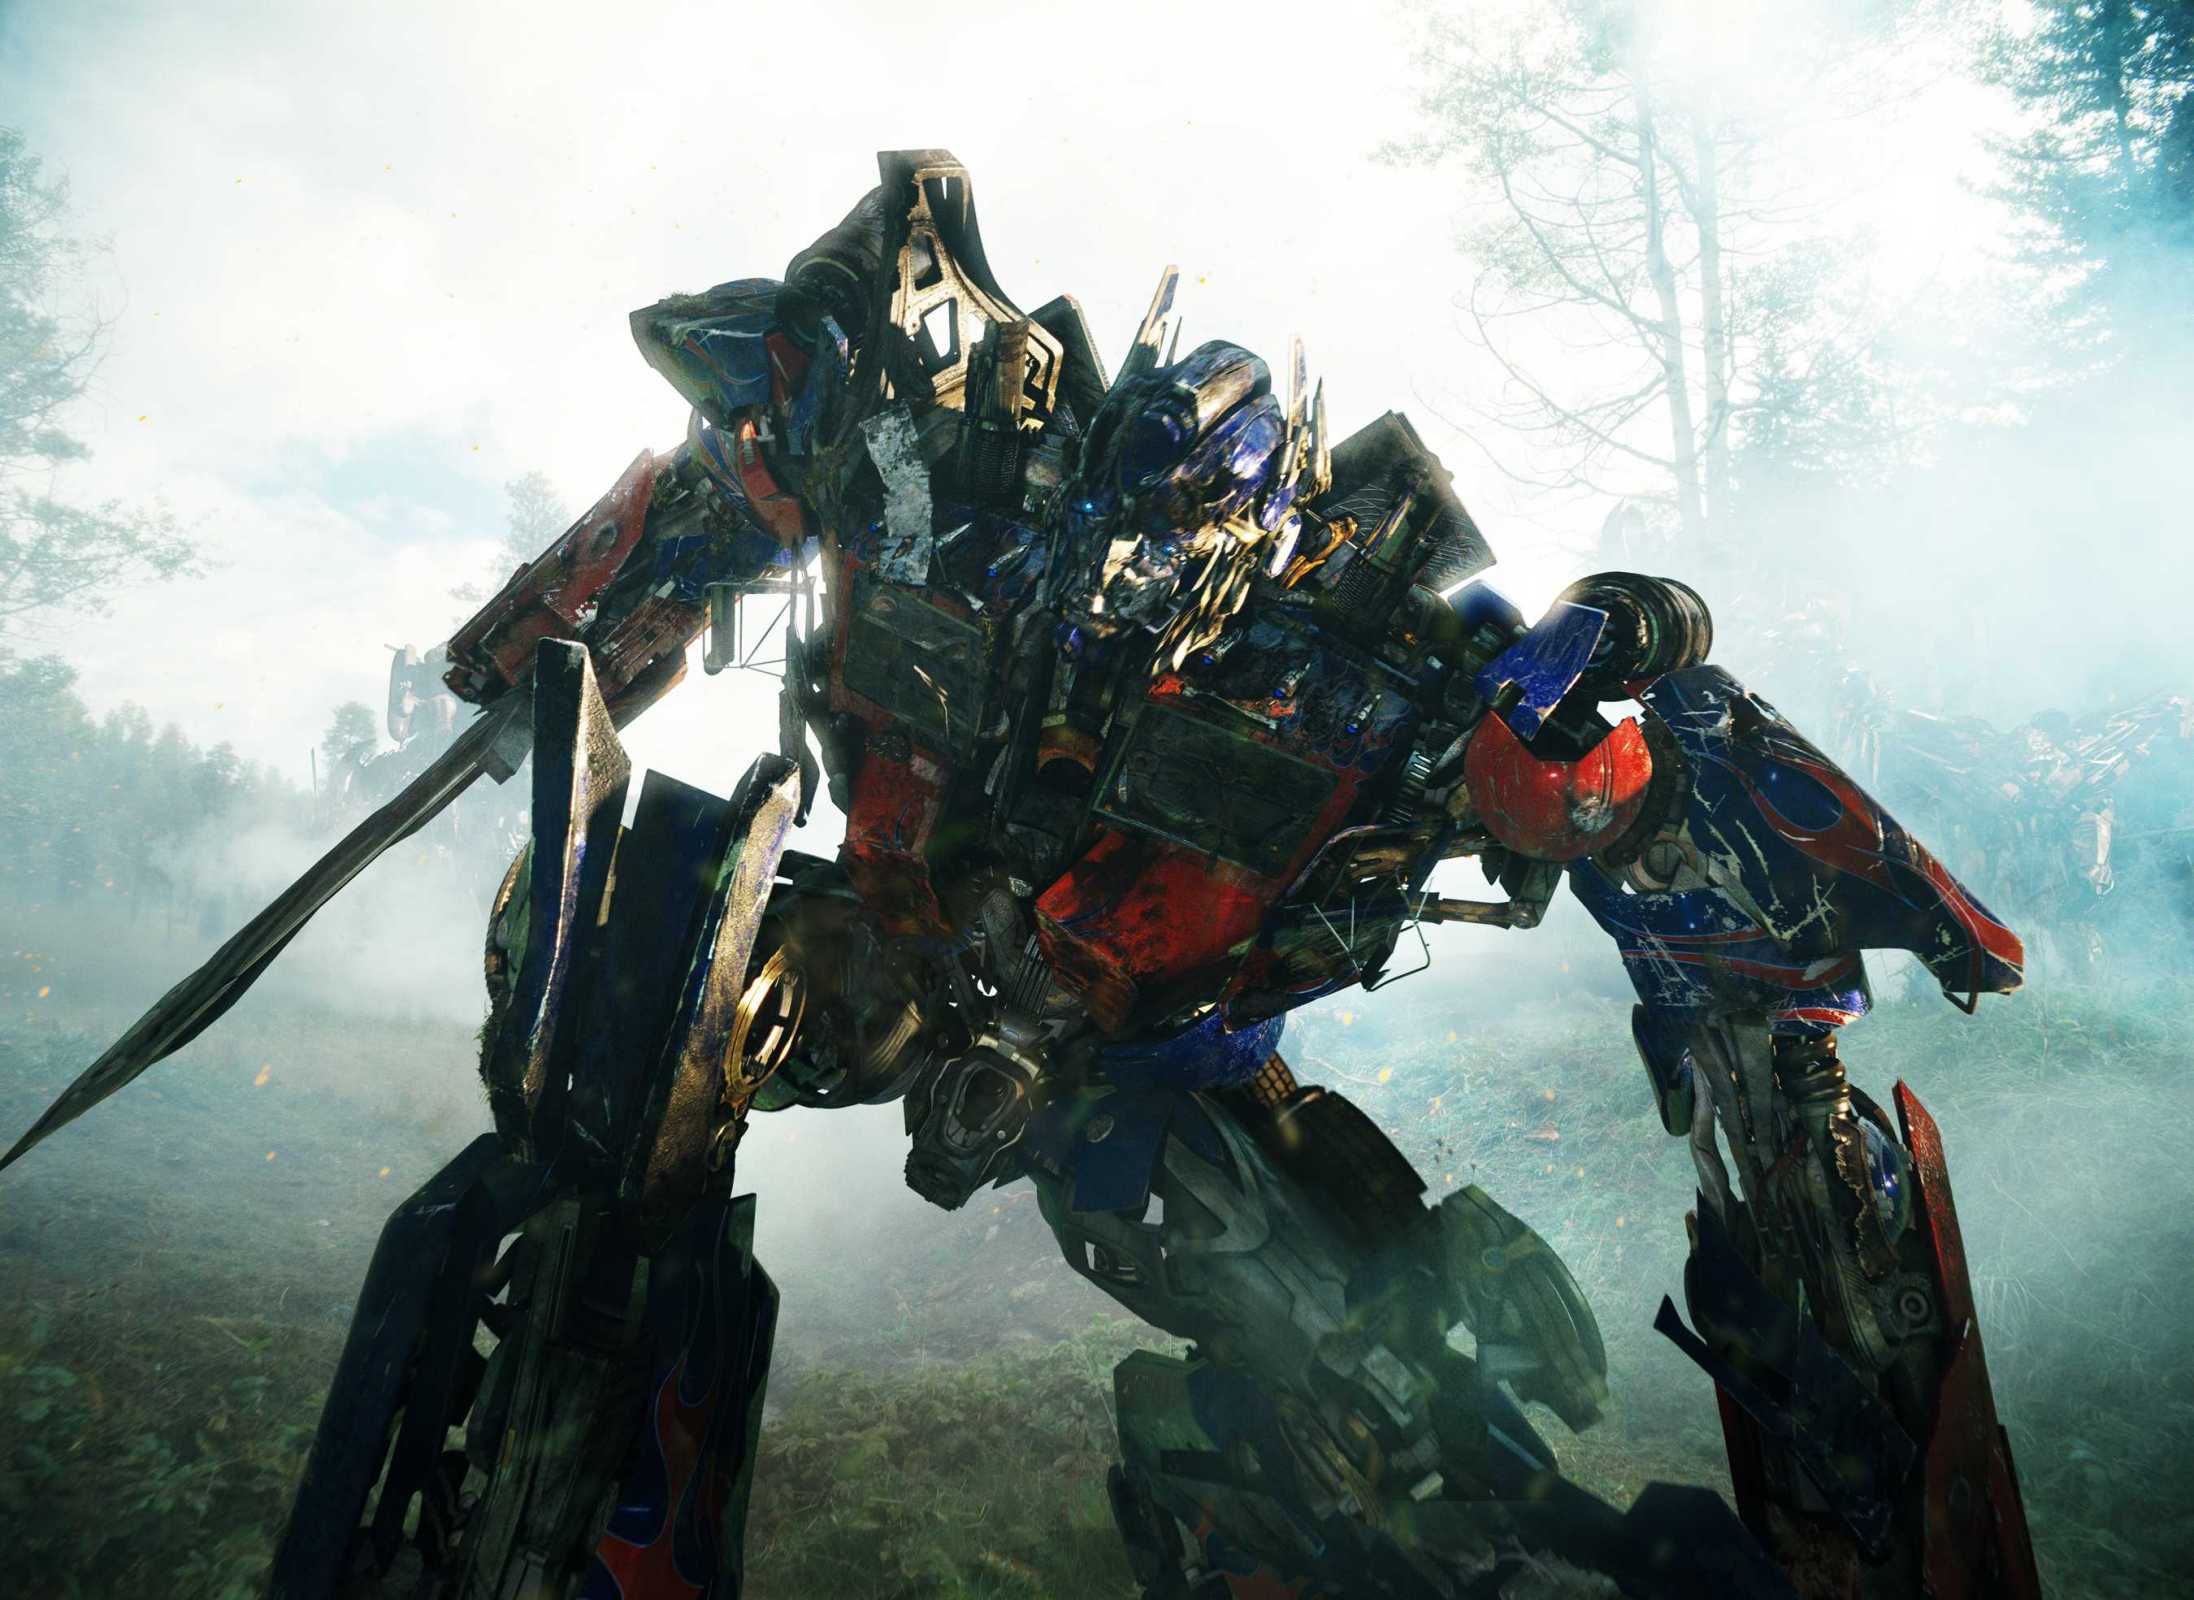 Movie Series Review: Transformers Revenge of the Fallen